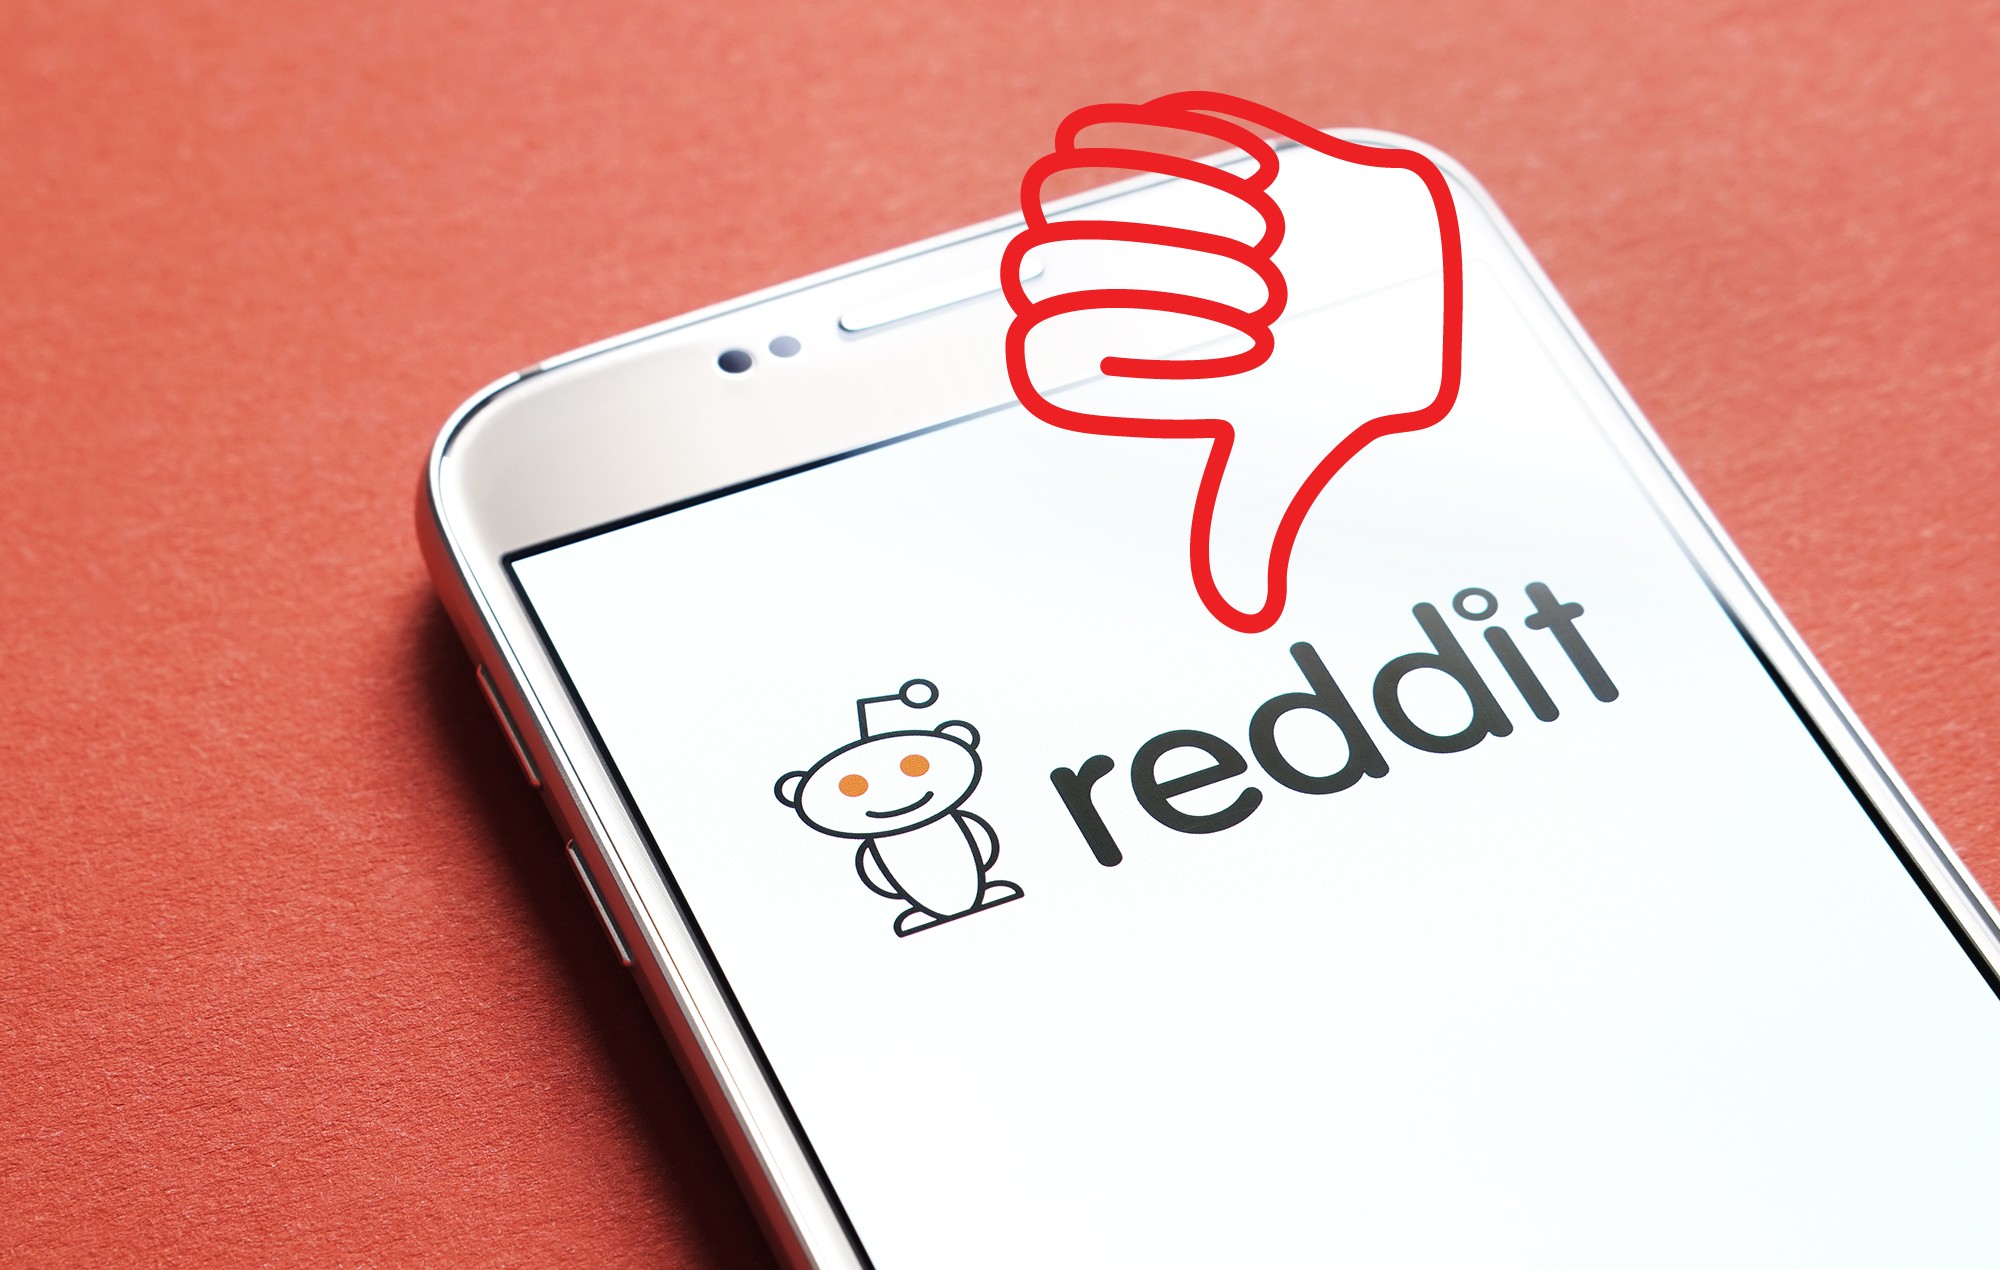 Reddit Was Hacked, Recommends Users Turn on 2FA